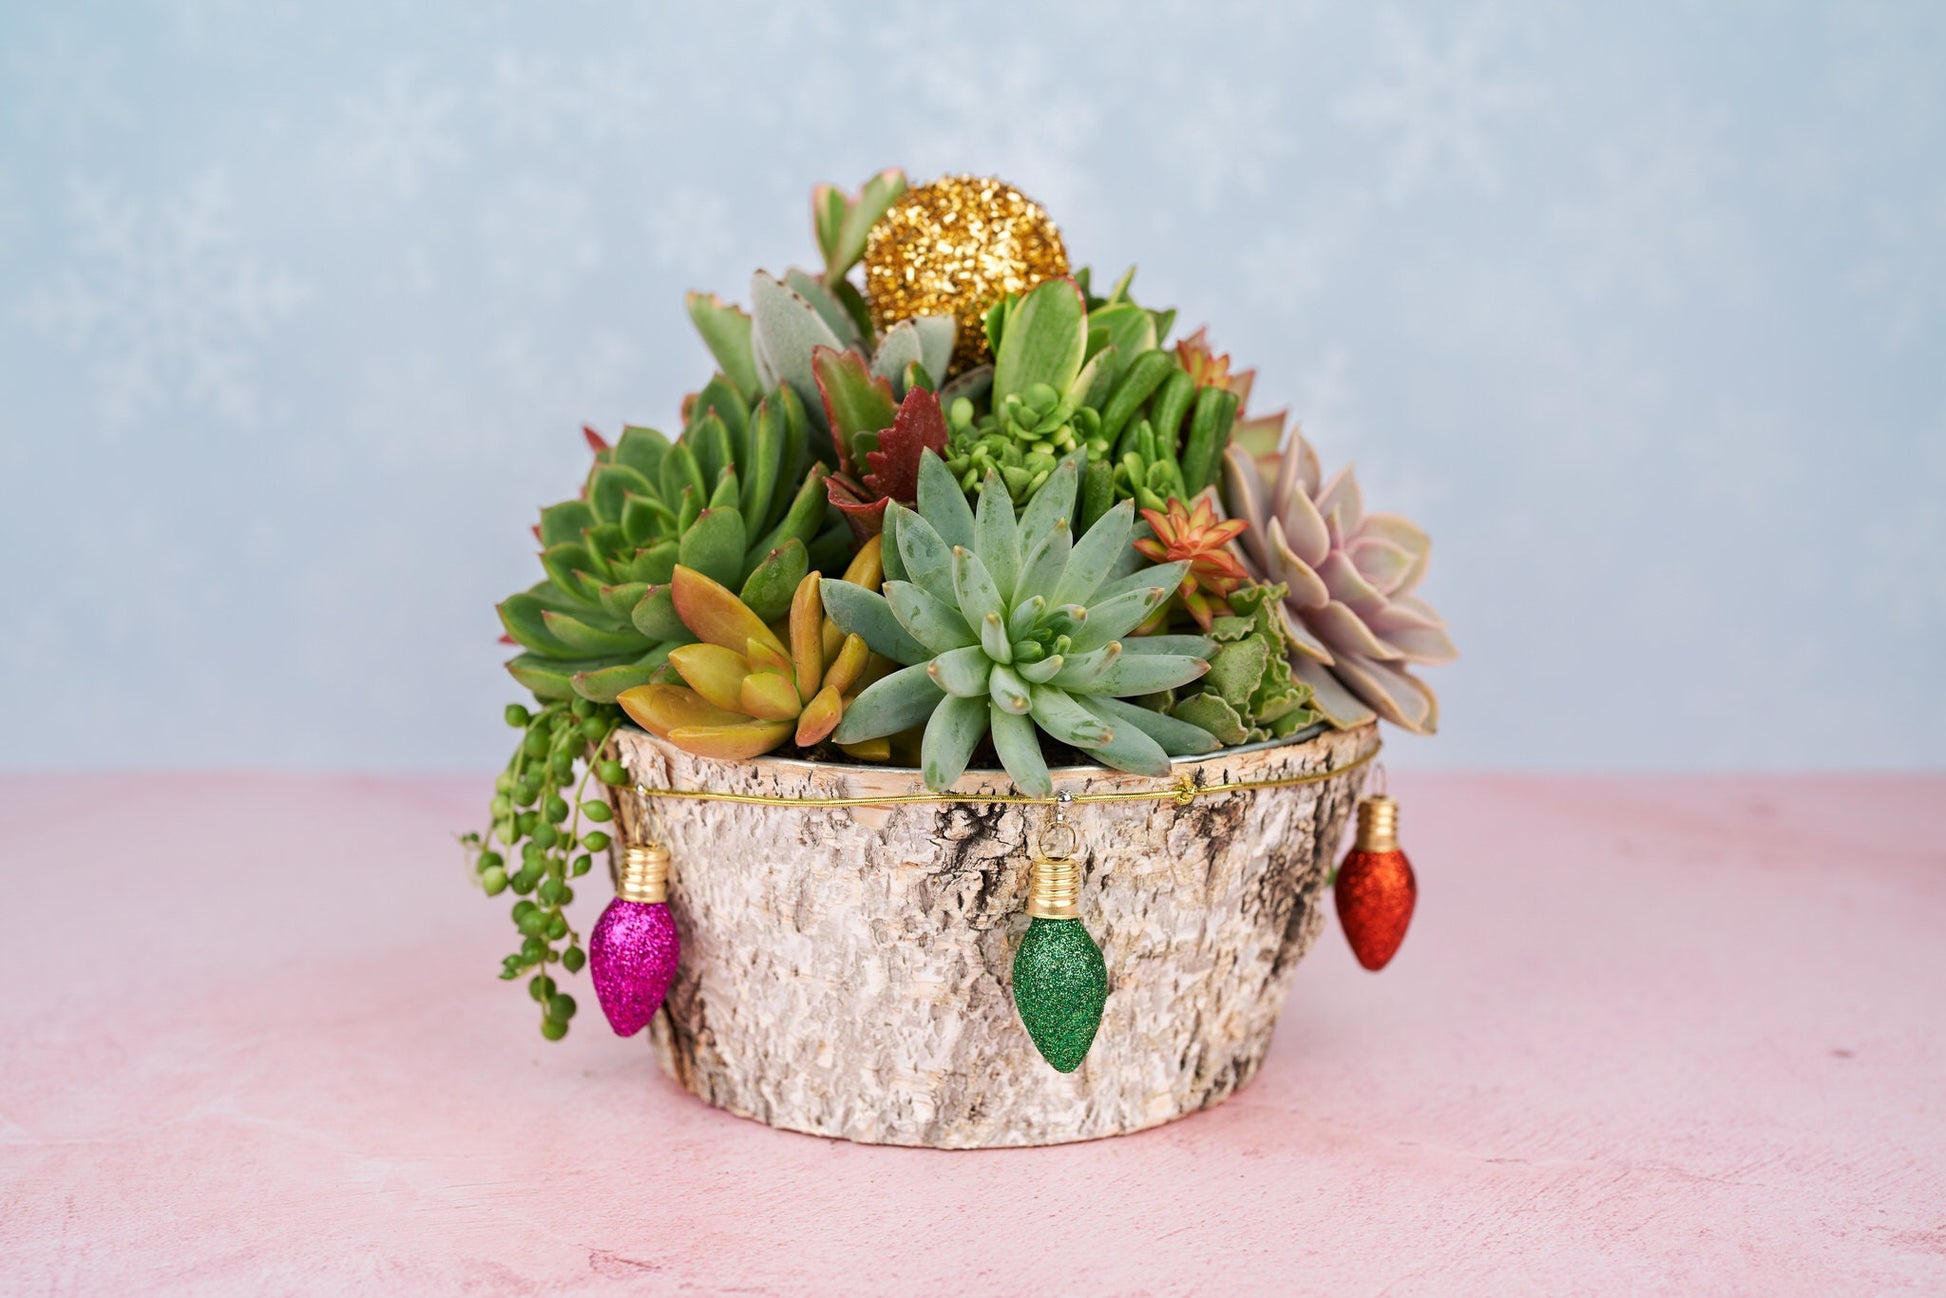 Christmas Holiday Round Birch Succulent Arrangement Planter: Living Succulent Centerpiece and Home Decor for Christmas and Winter Holidays